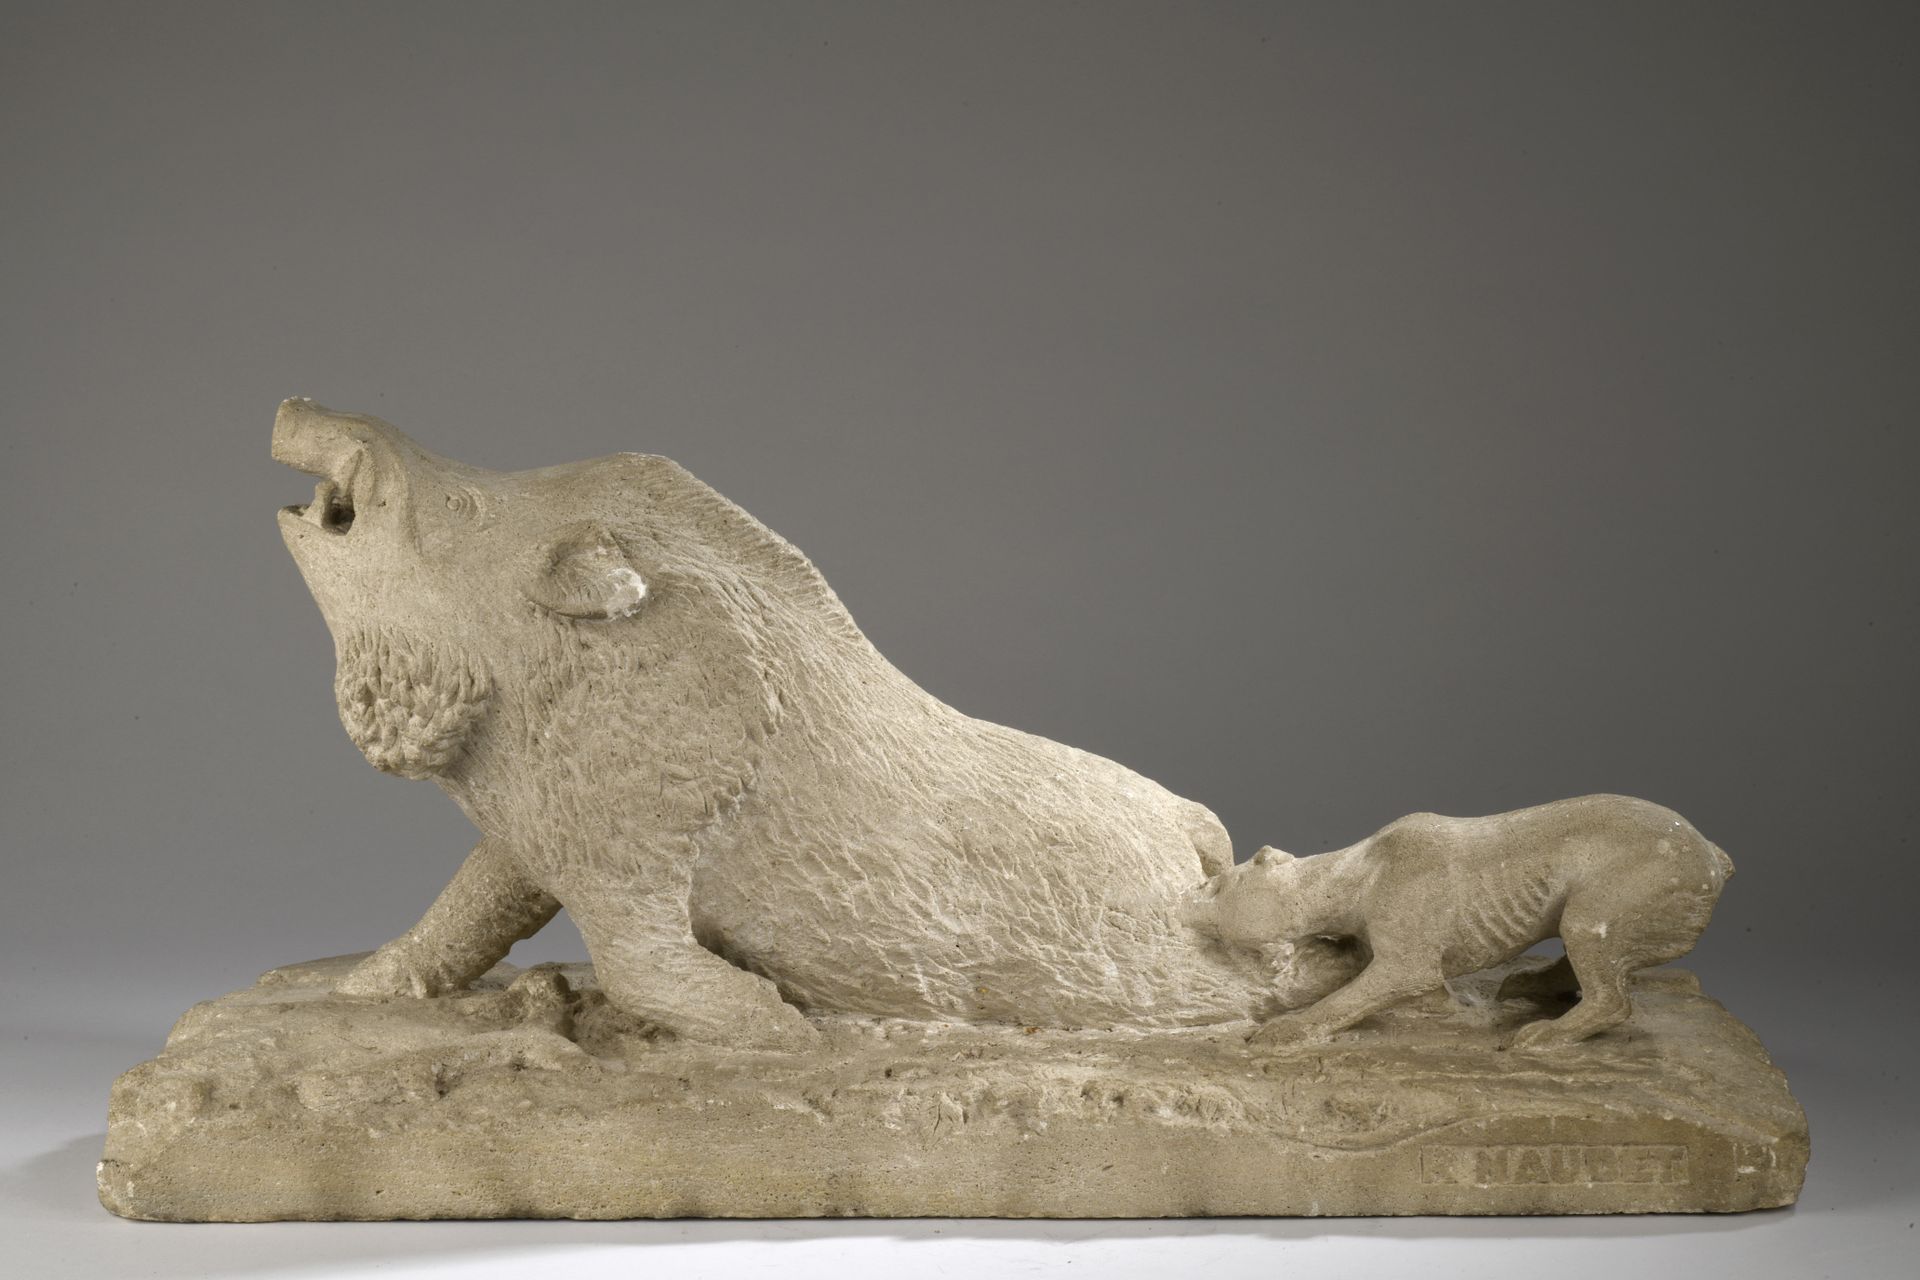 Null R. Naudet (active circa 1900)
Wild boar attacked by a dog 
Stone sculpture &hellip;